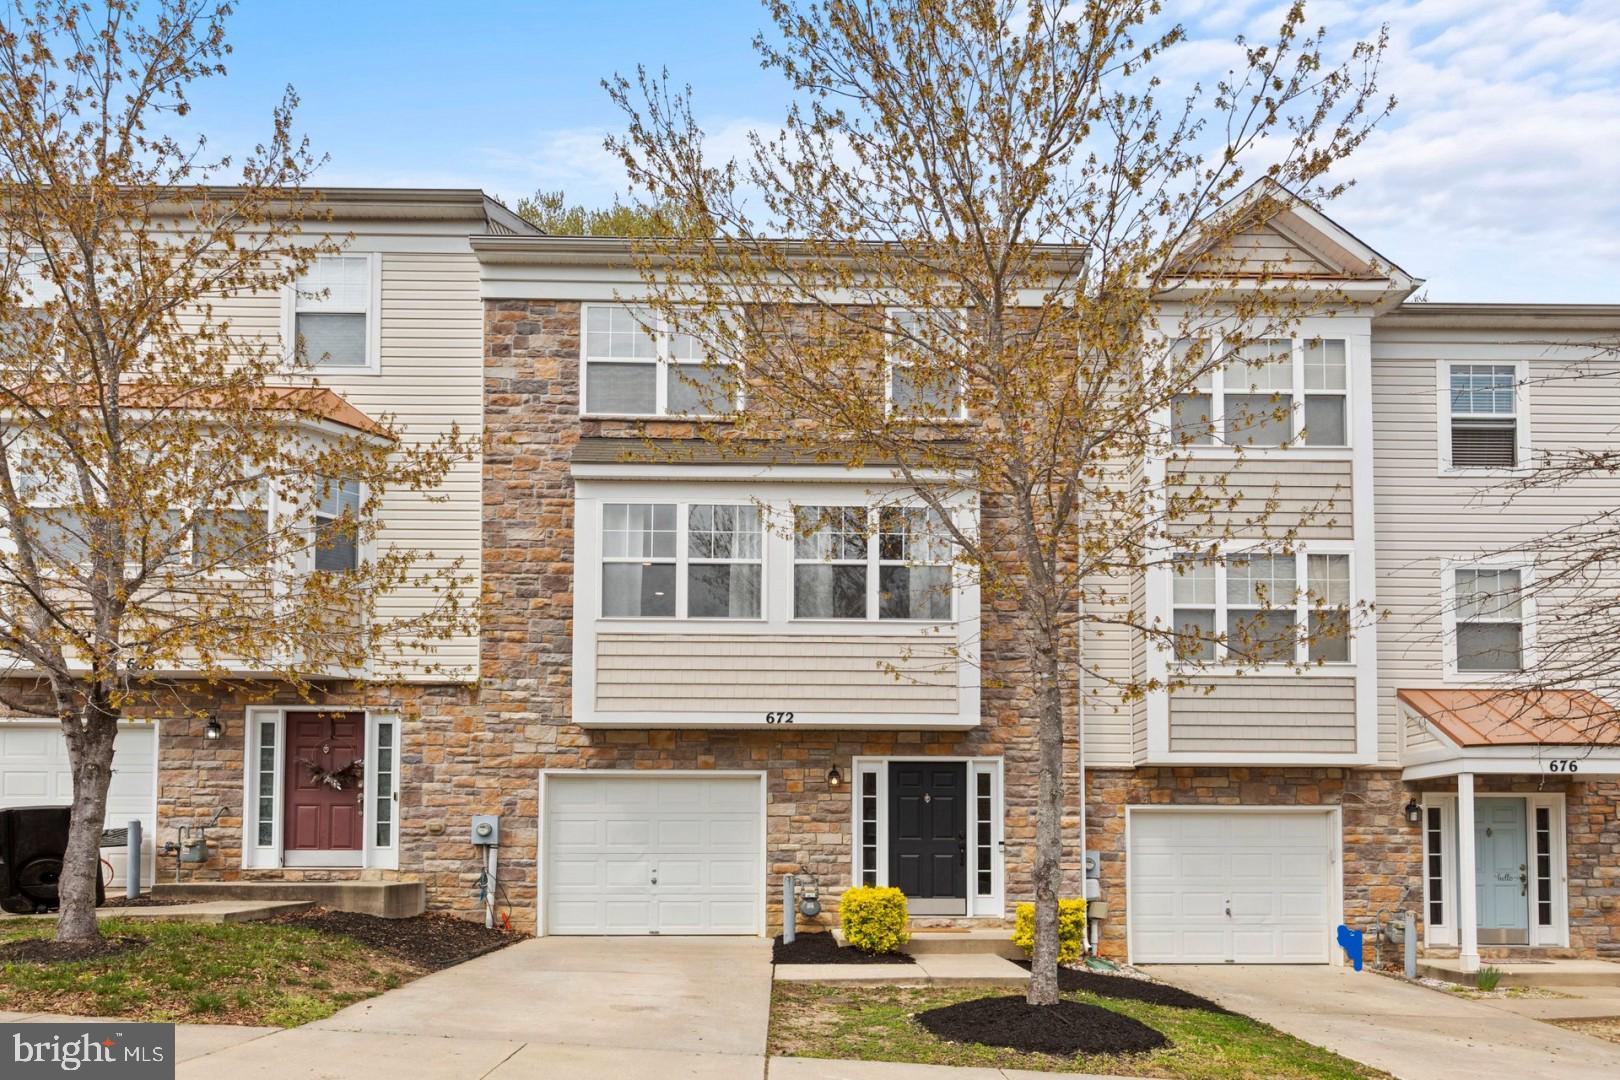 If you've been looking for your move-in-ready, DREAM townhome in Calvert County, this is for you! Th